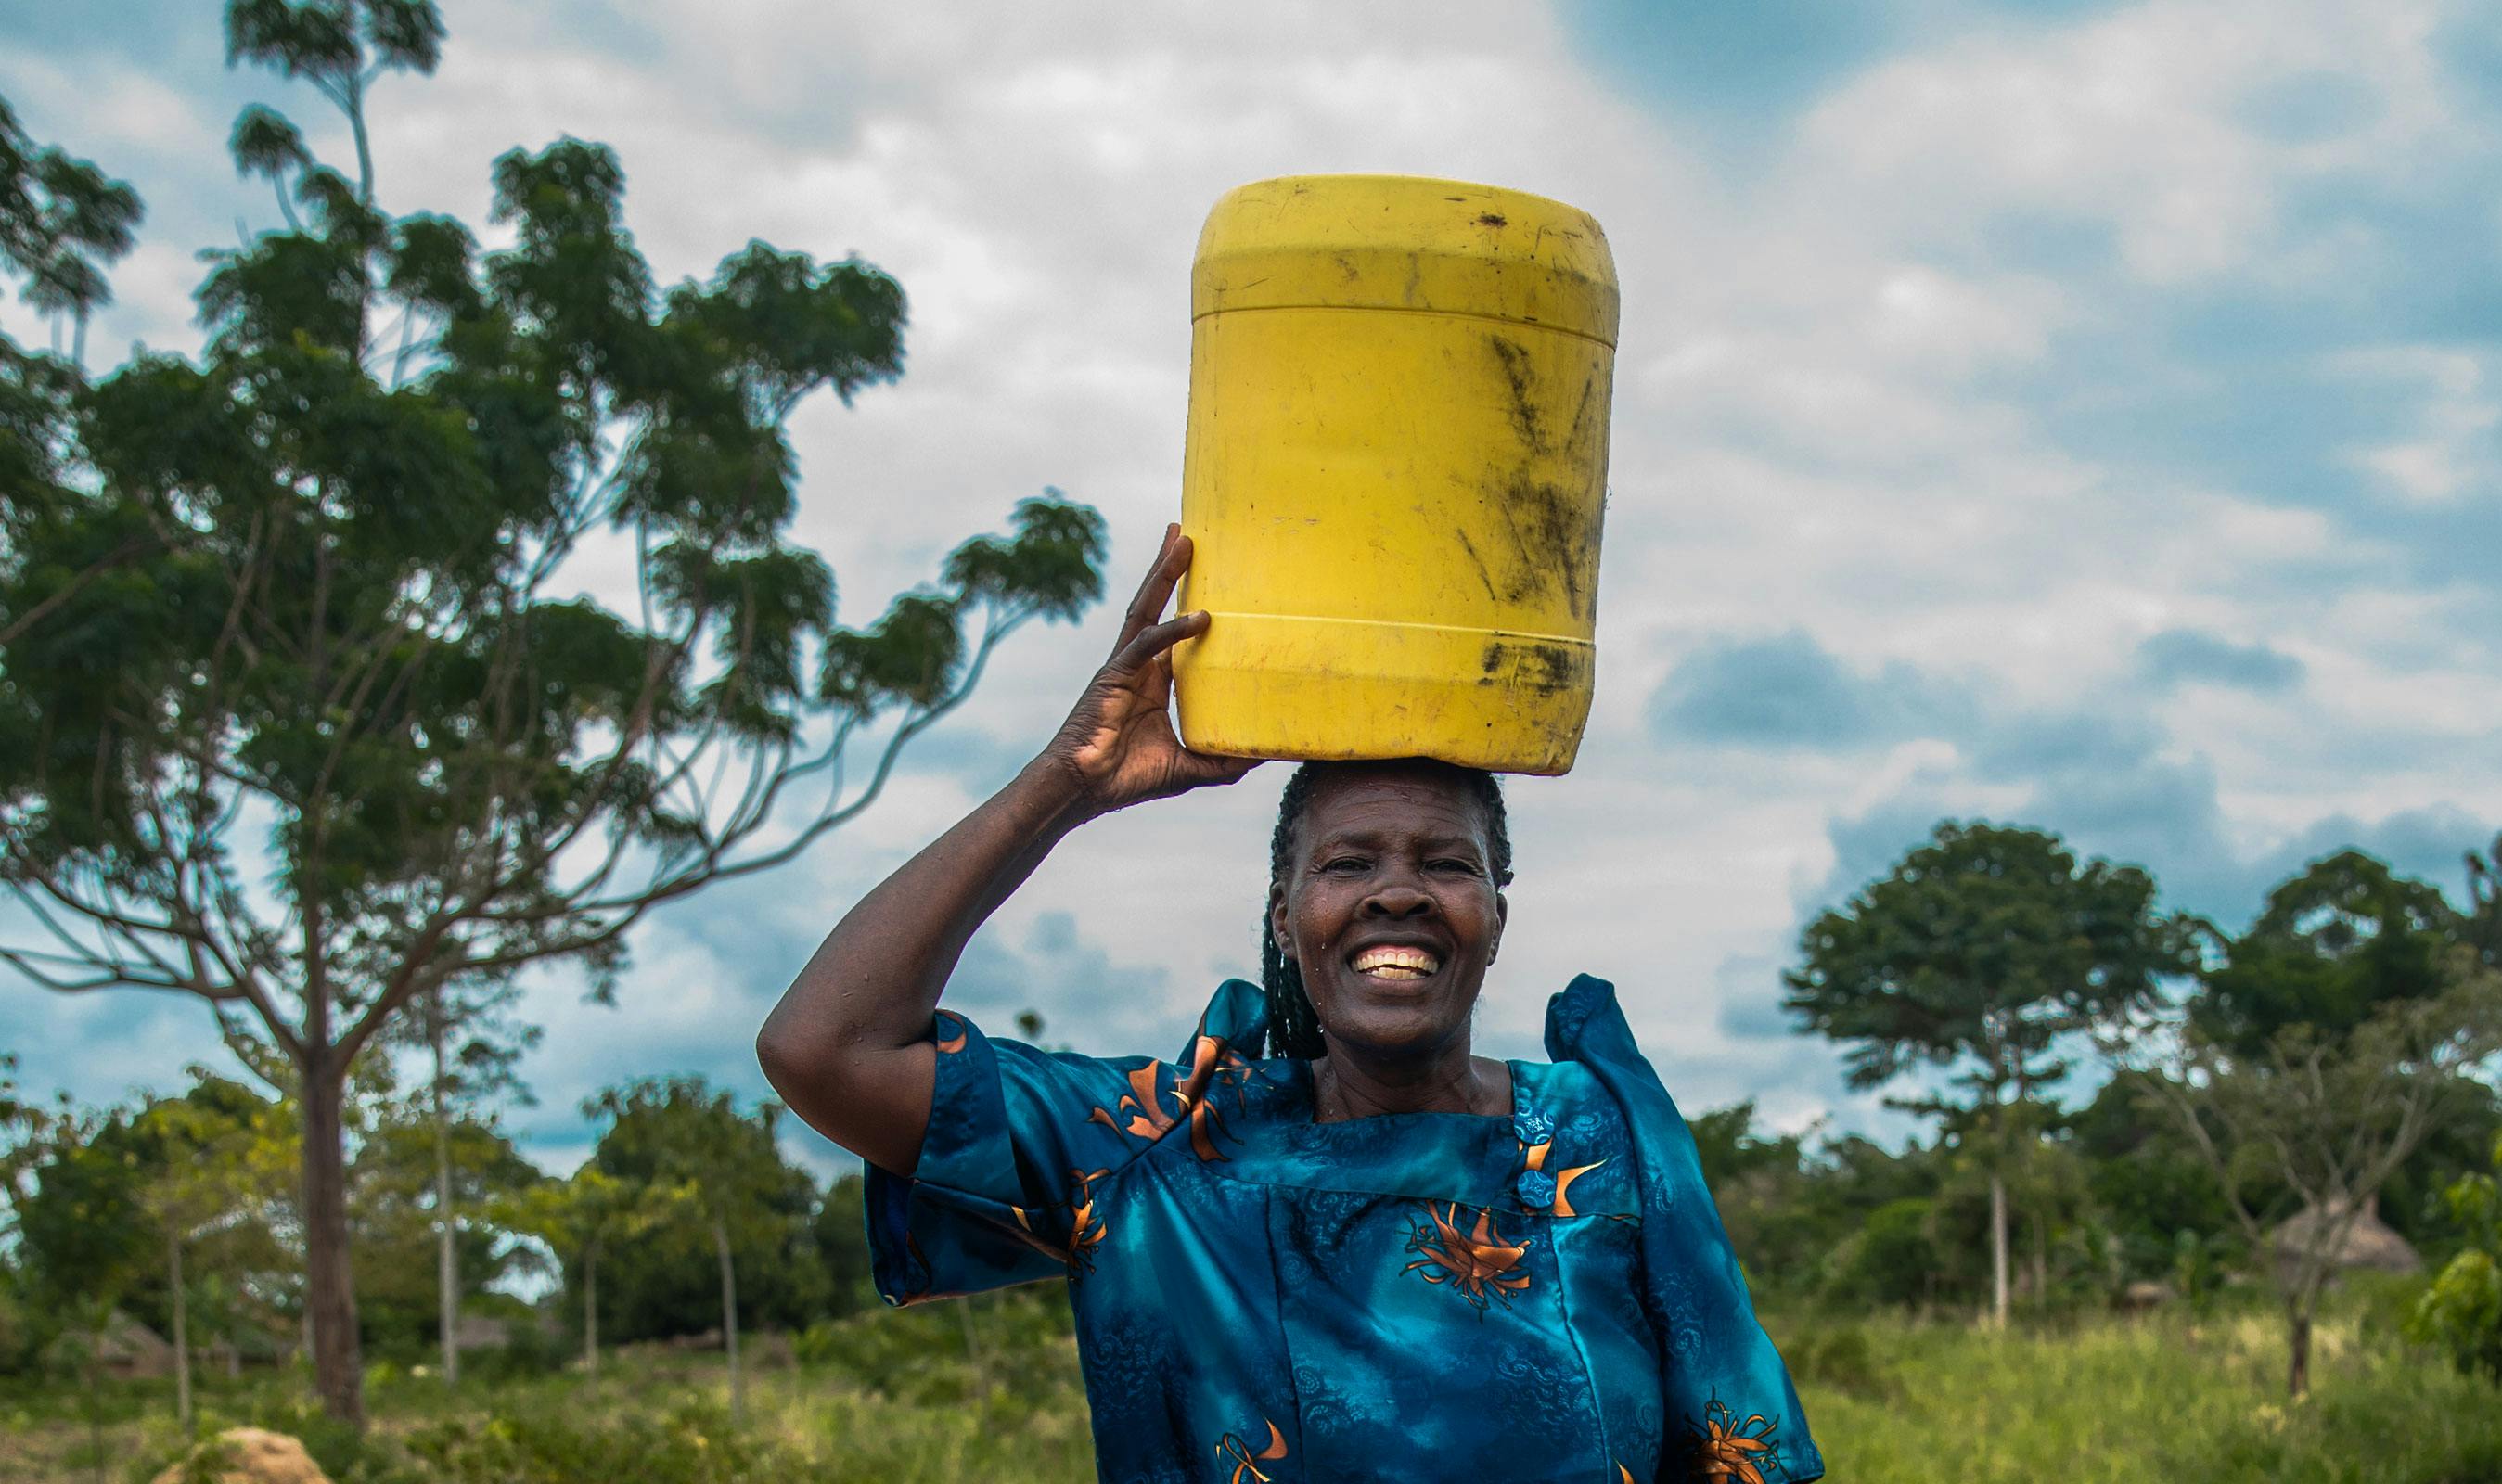 my.charitywater.org